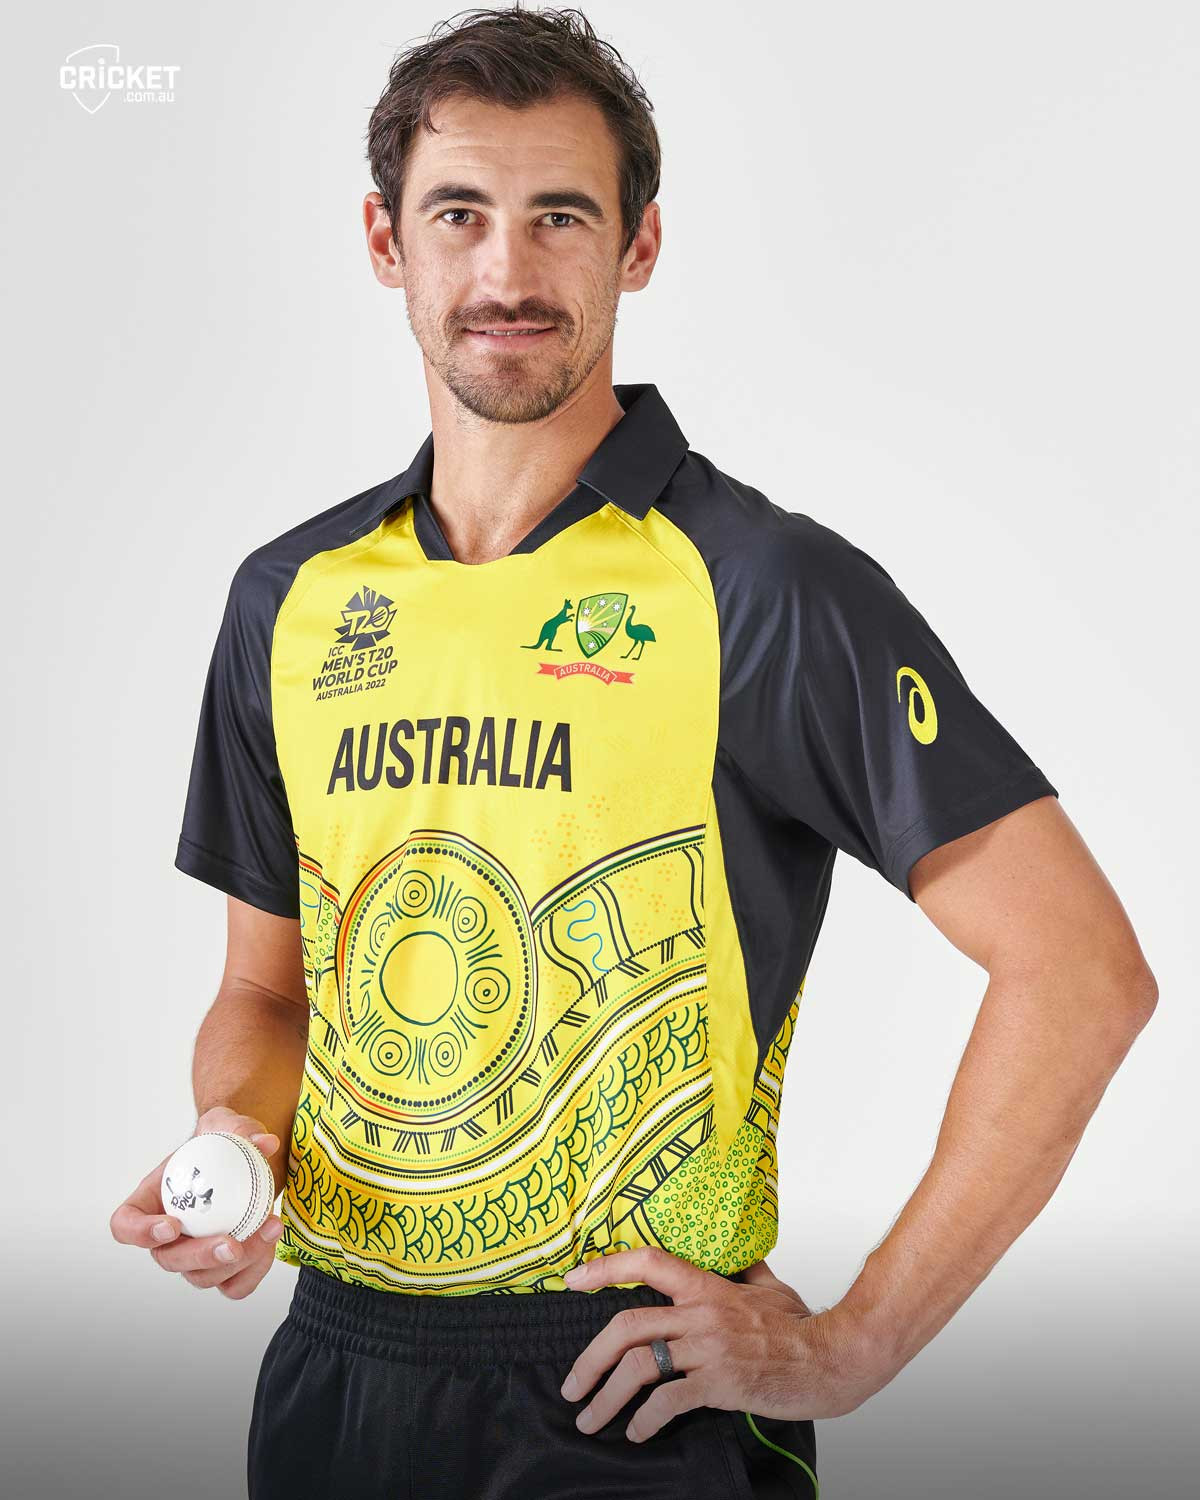 Australians to wear indigenous design at T20 World Cup